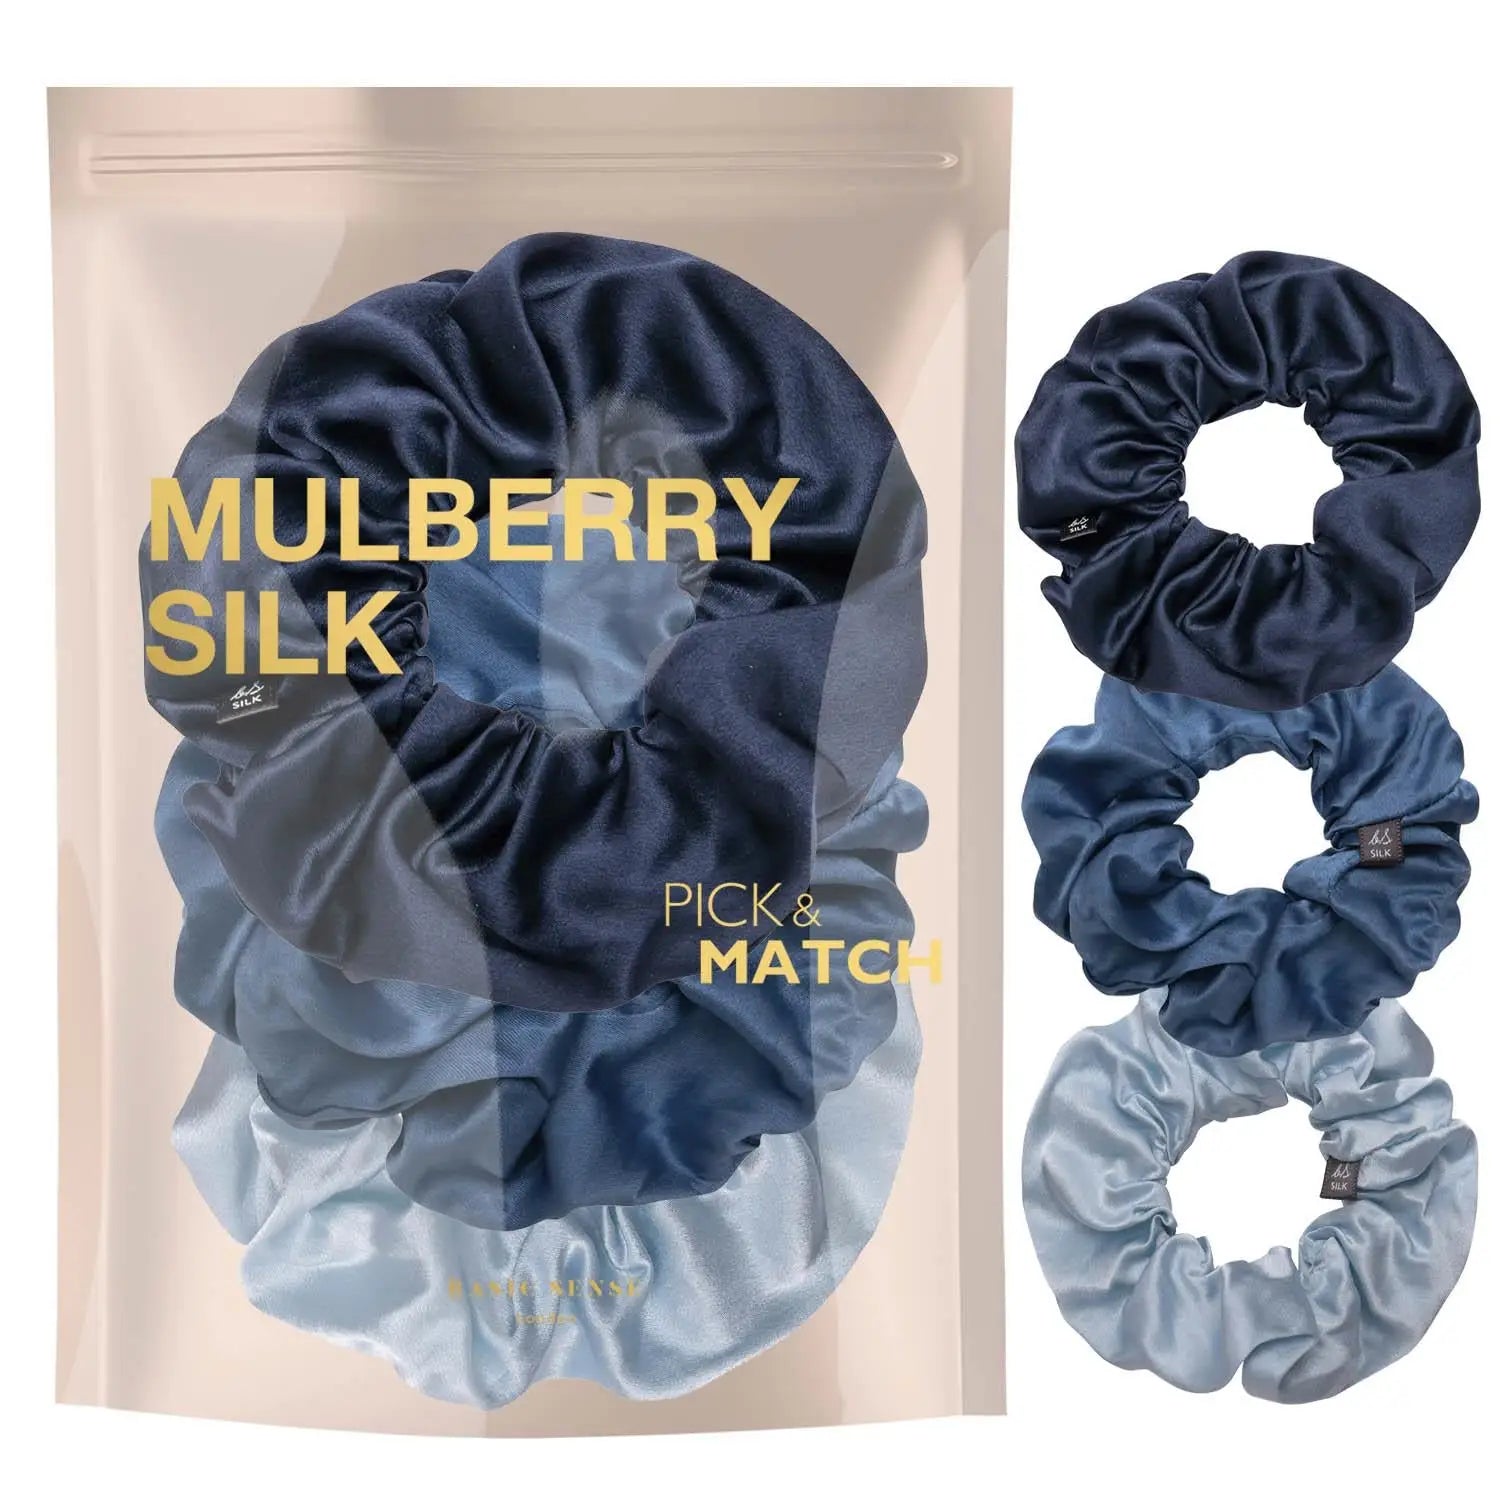 Mulberry Silk Hair Scrunchies: Large 3-Piece Set - Mulberry Silk Sca Pack